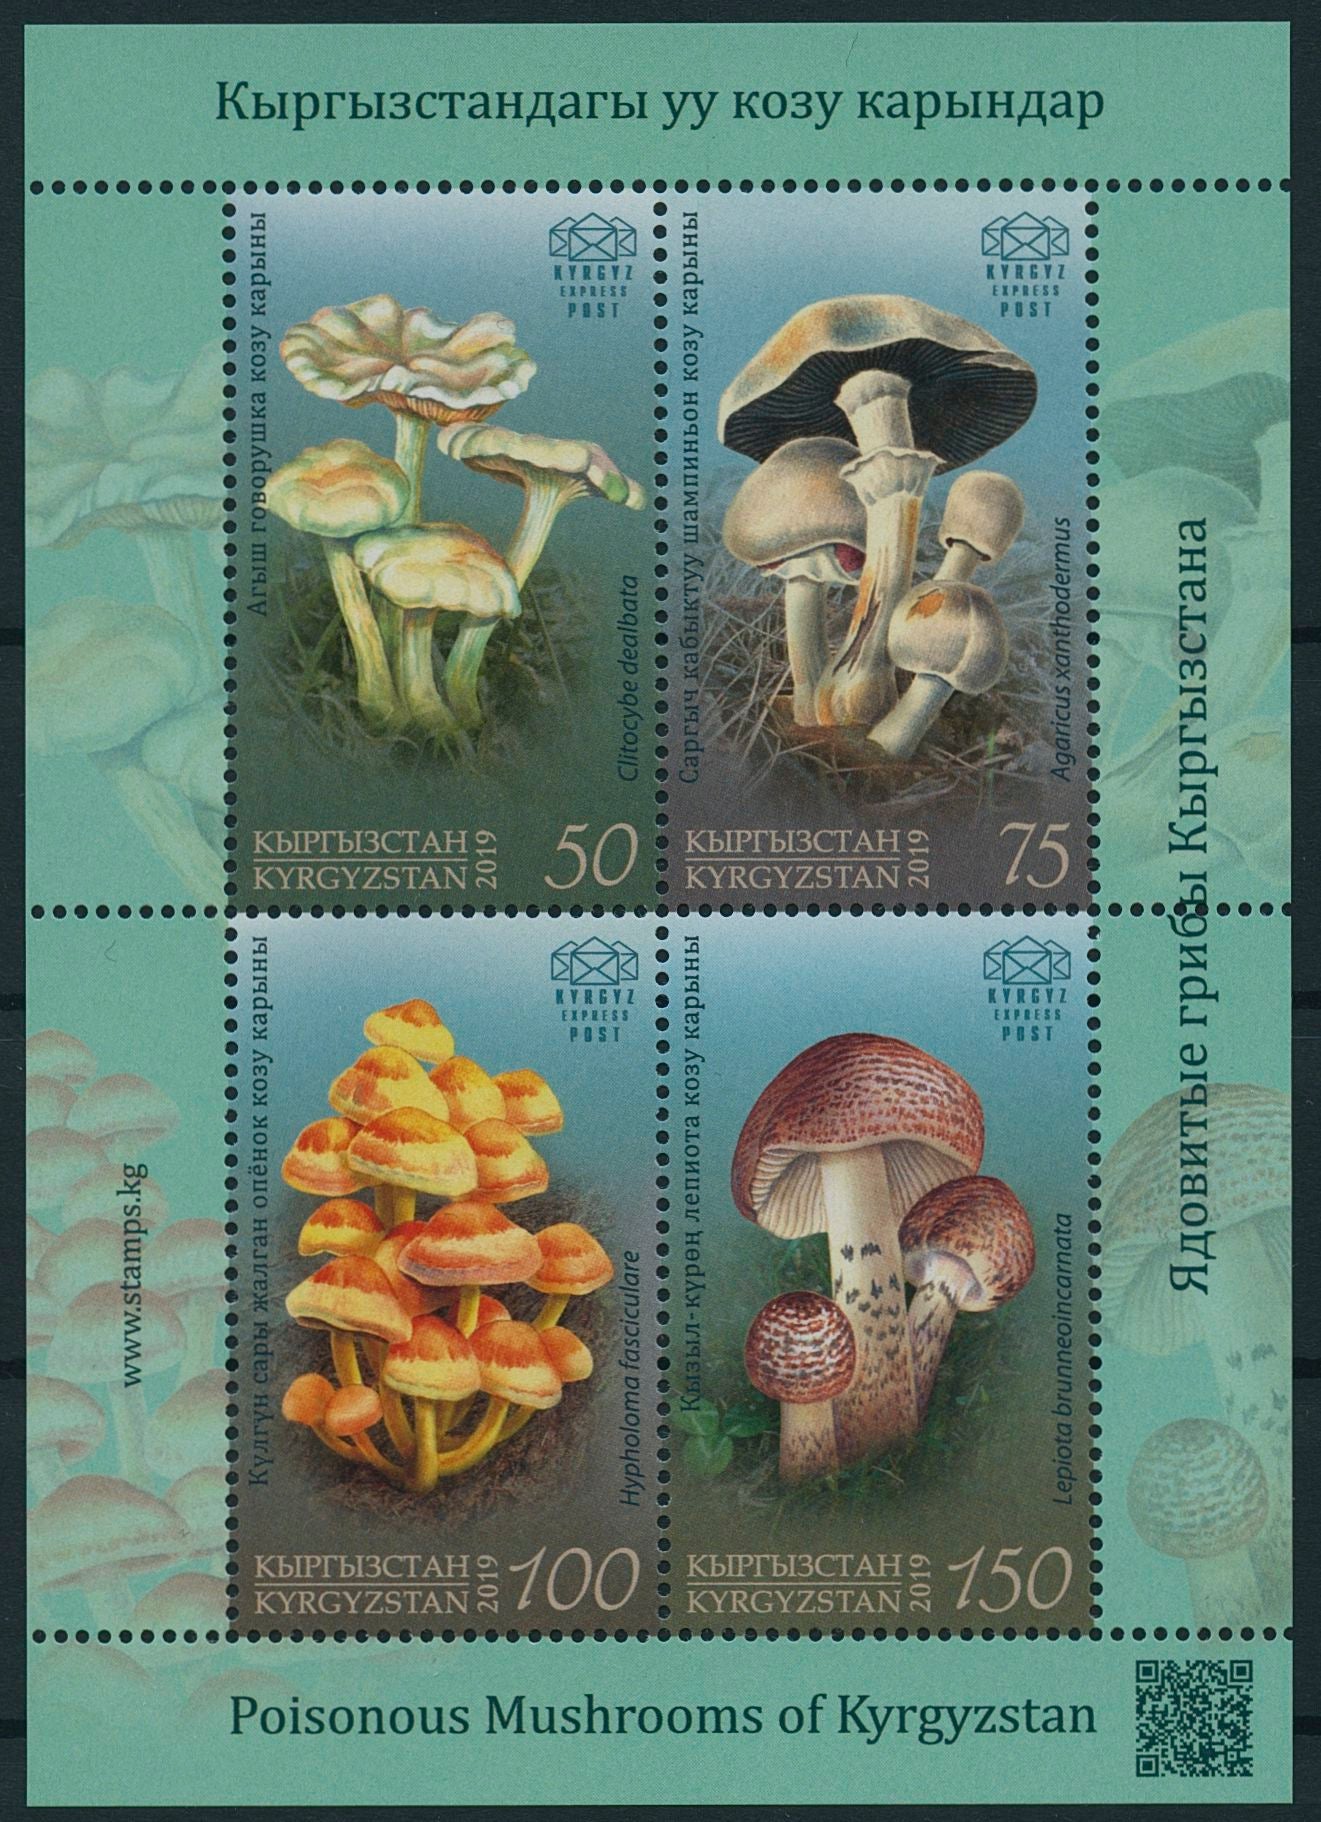 Kyrgyzstan KEP 2019 MNH Poisonous Mushrooms 4v M/S Fungi Nature Stamps